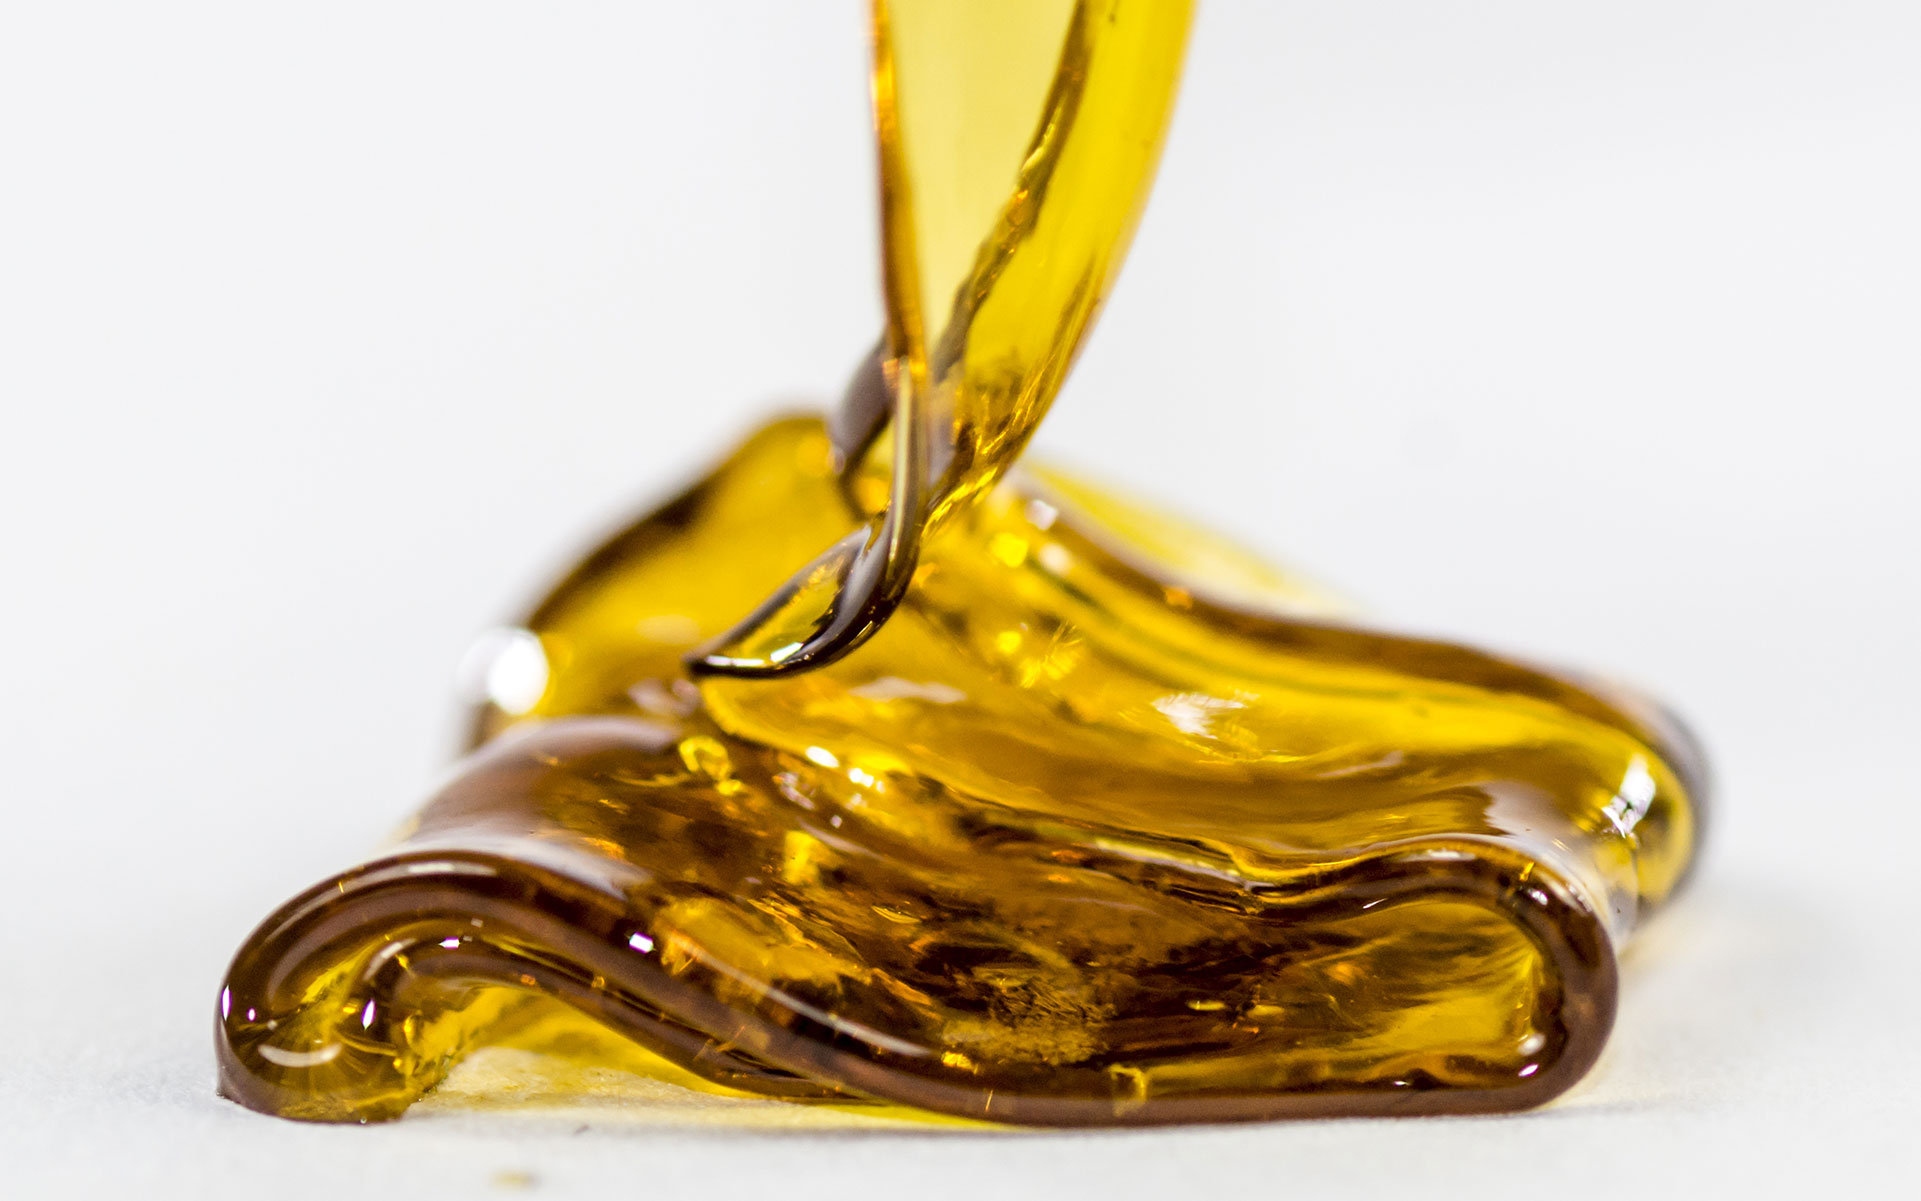 What are full-spectrum cannabis extracts and how are they made